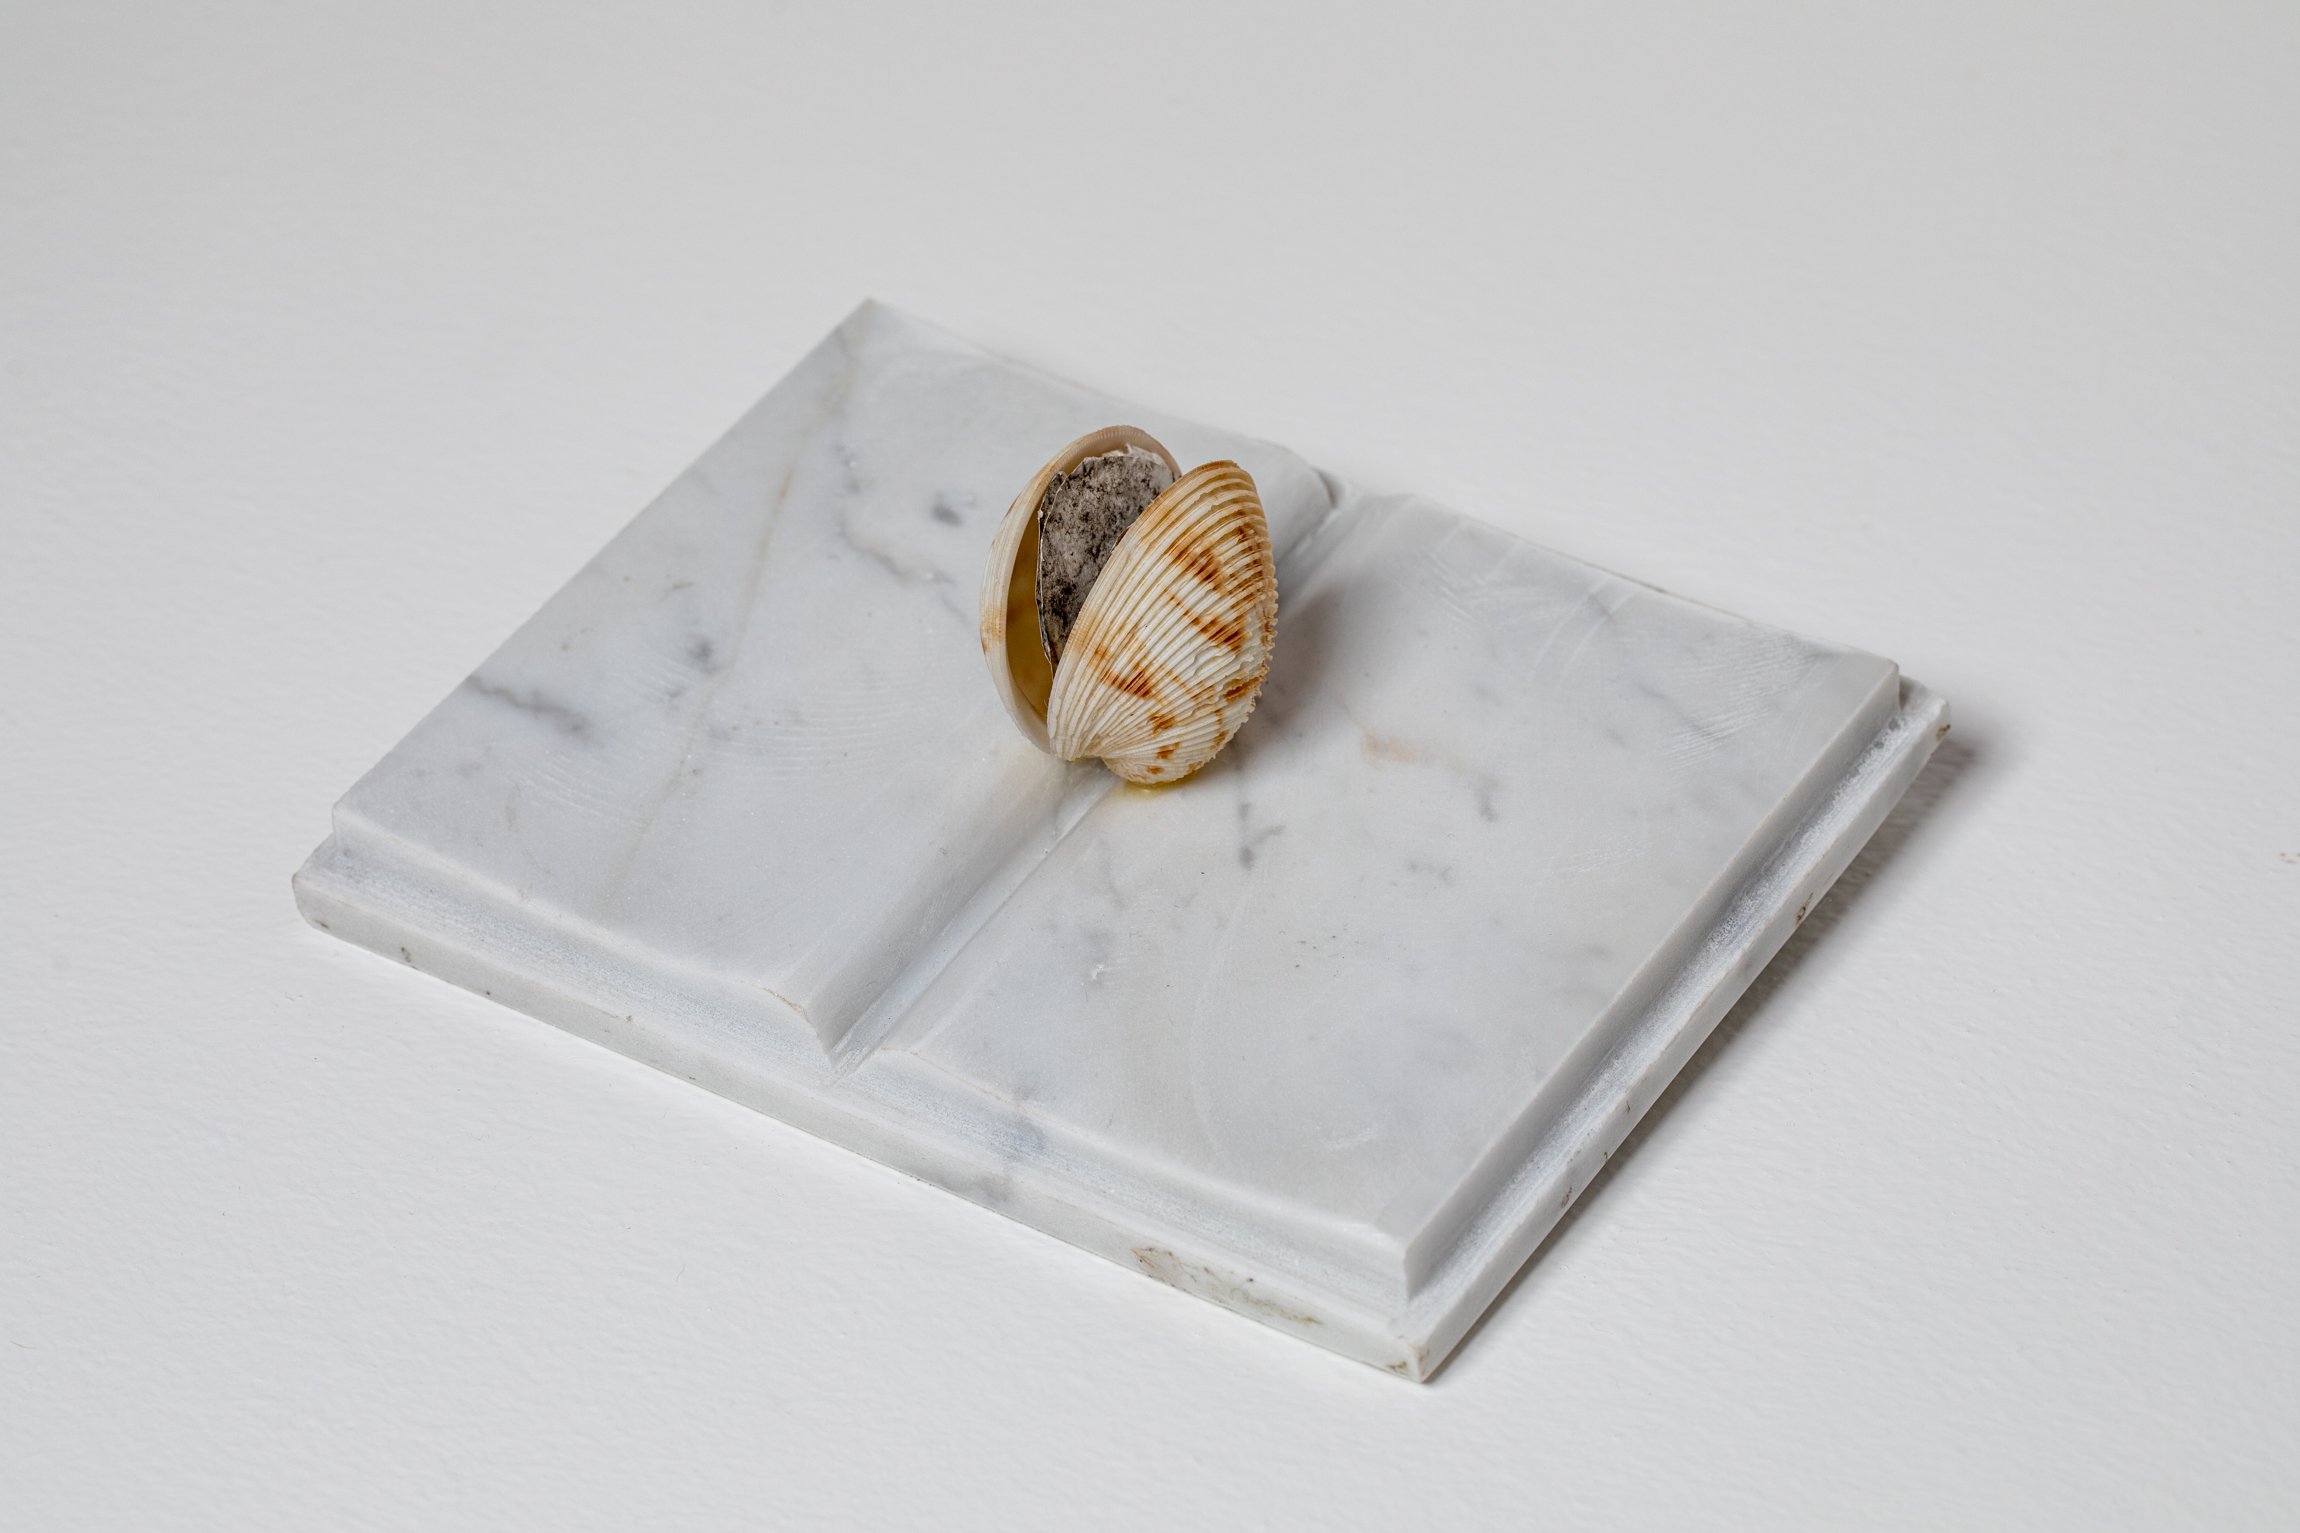 A book is a shell, 1993
Marble, shell, paper